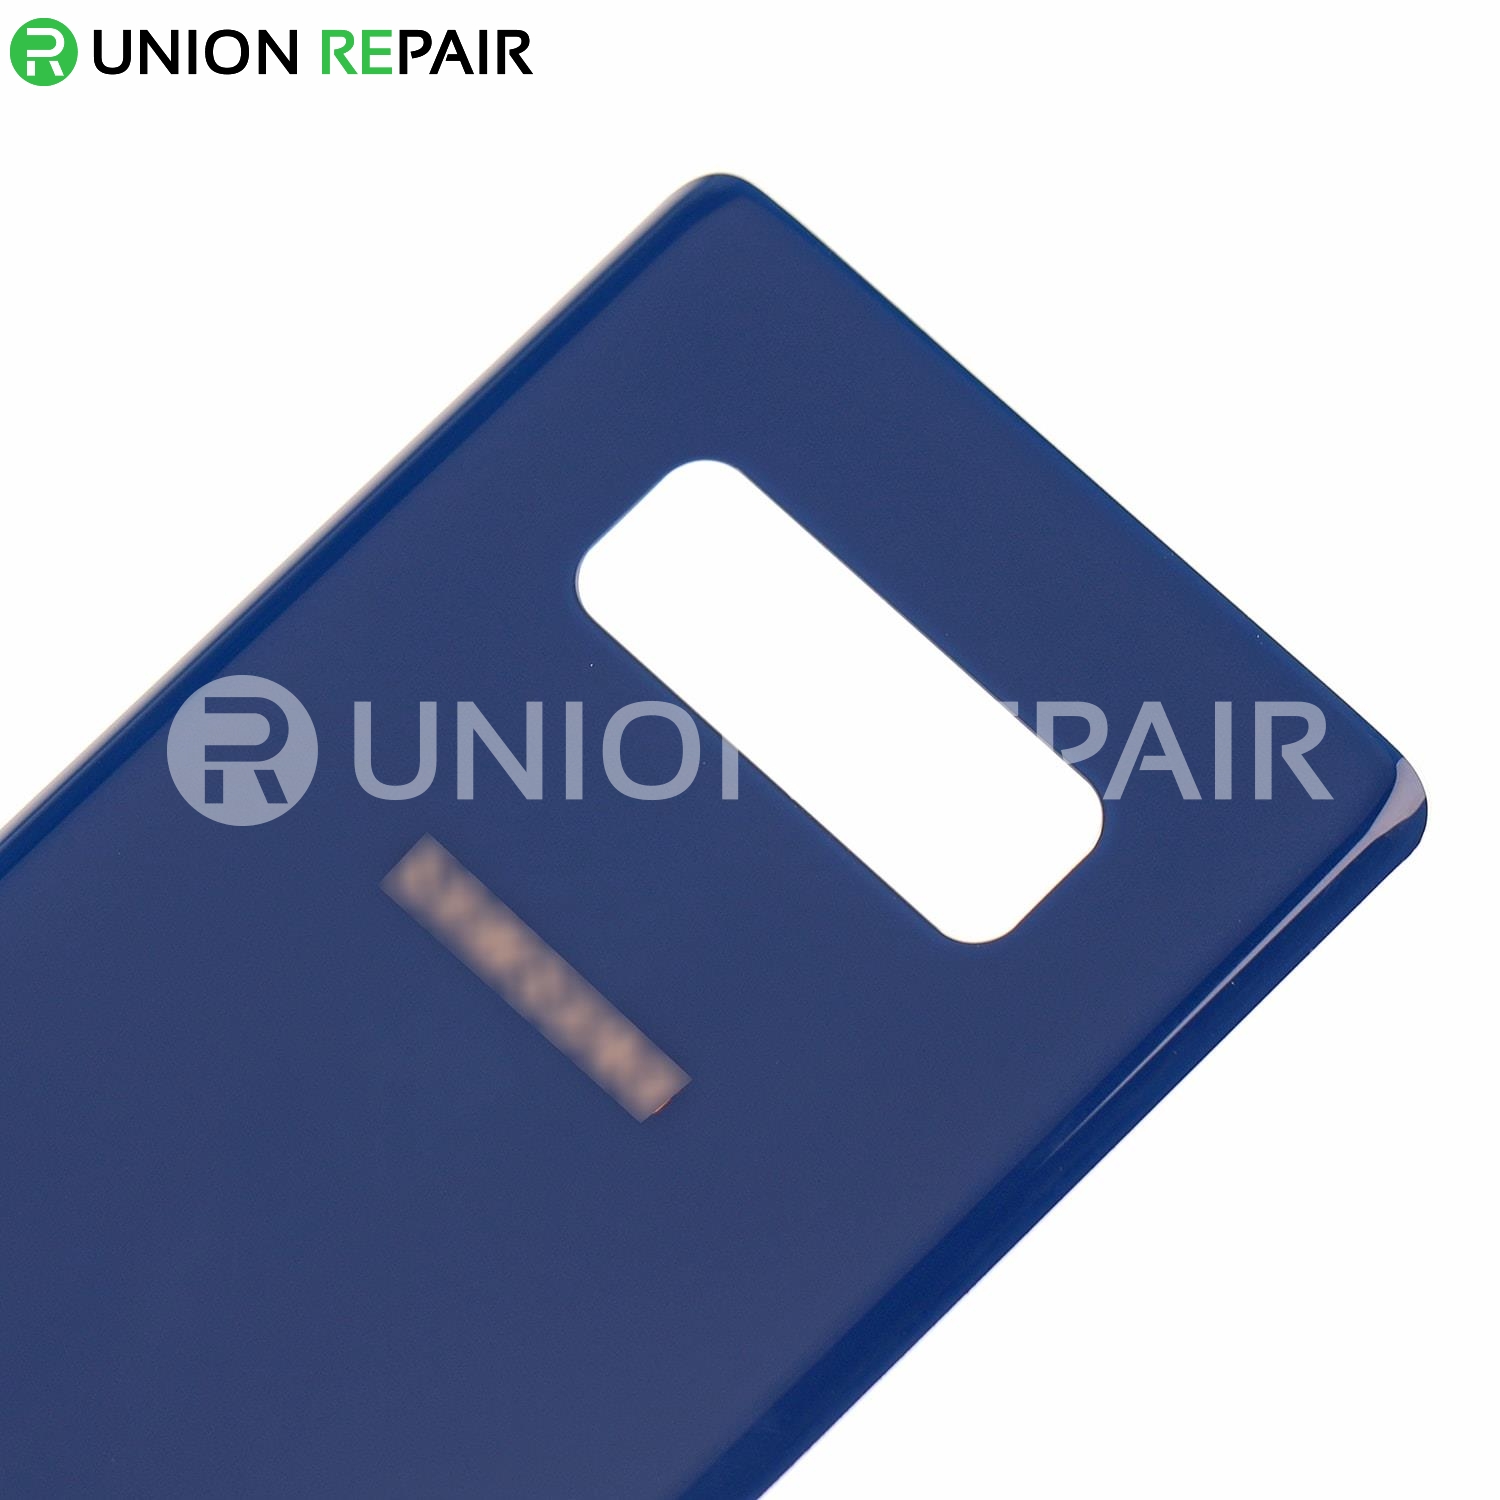 Replacement for Samsung Galaxy Note 8 SM-N950 Back Cover - Deepsea Blue